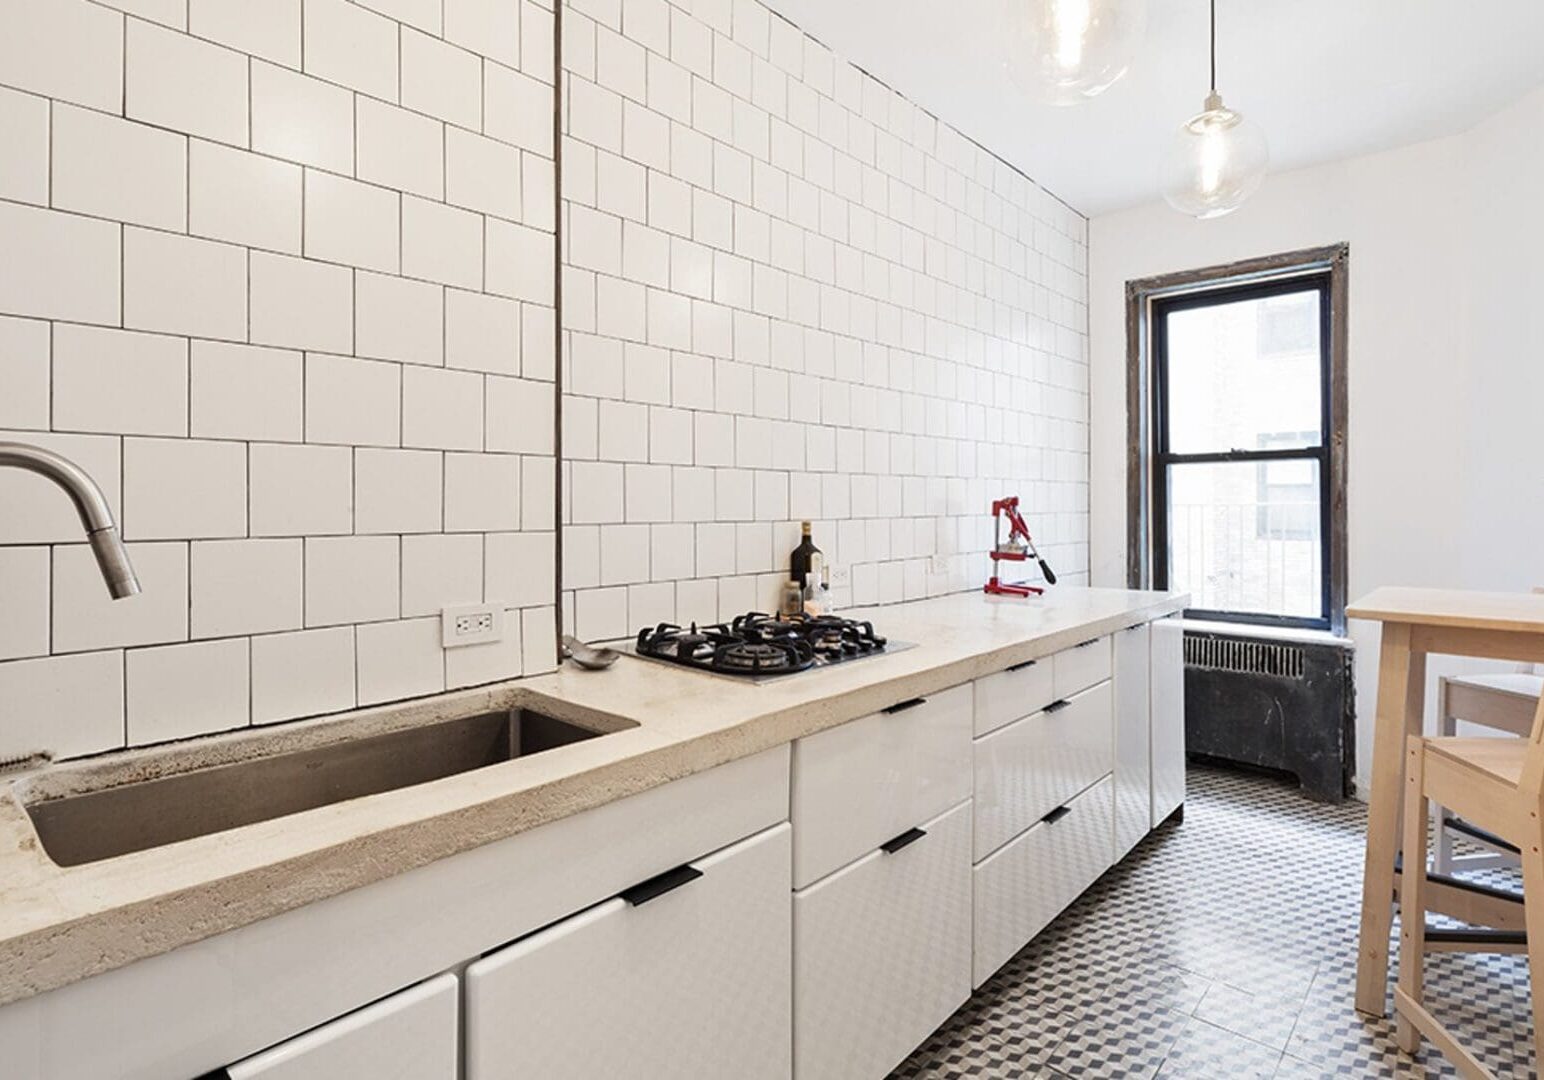 A kitchen with white cabinets and tiled walls.